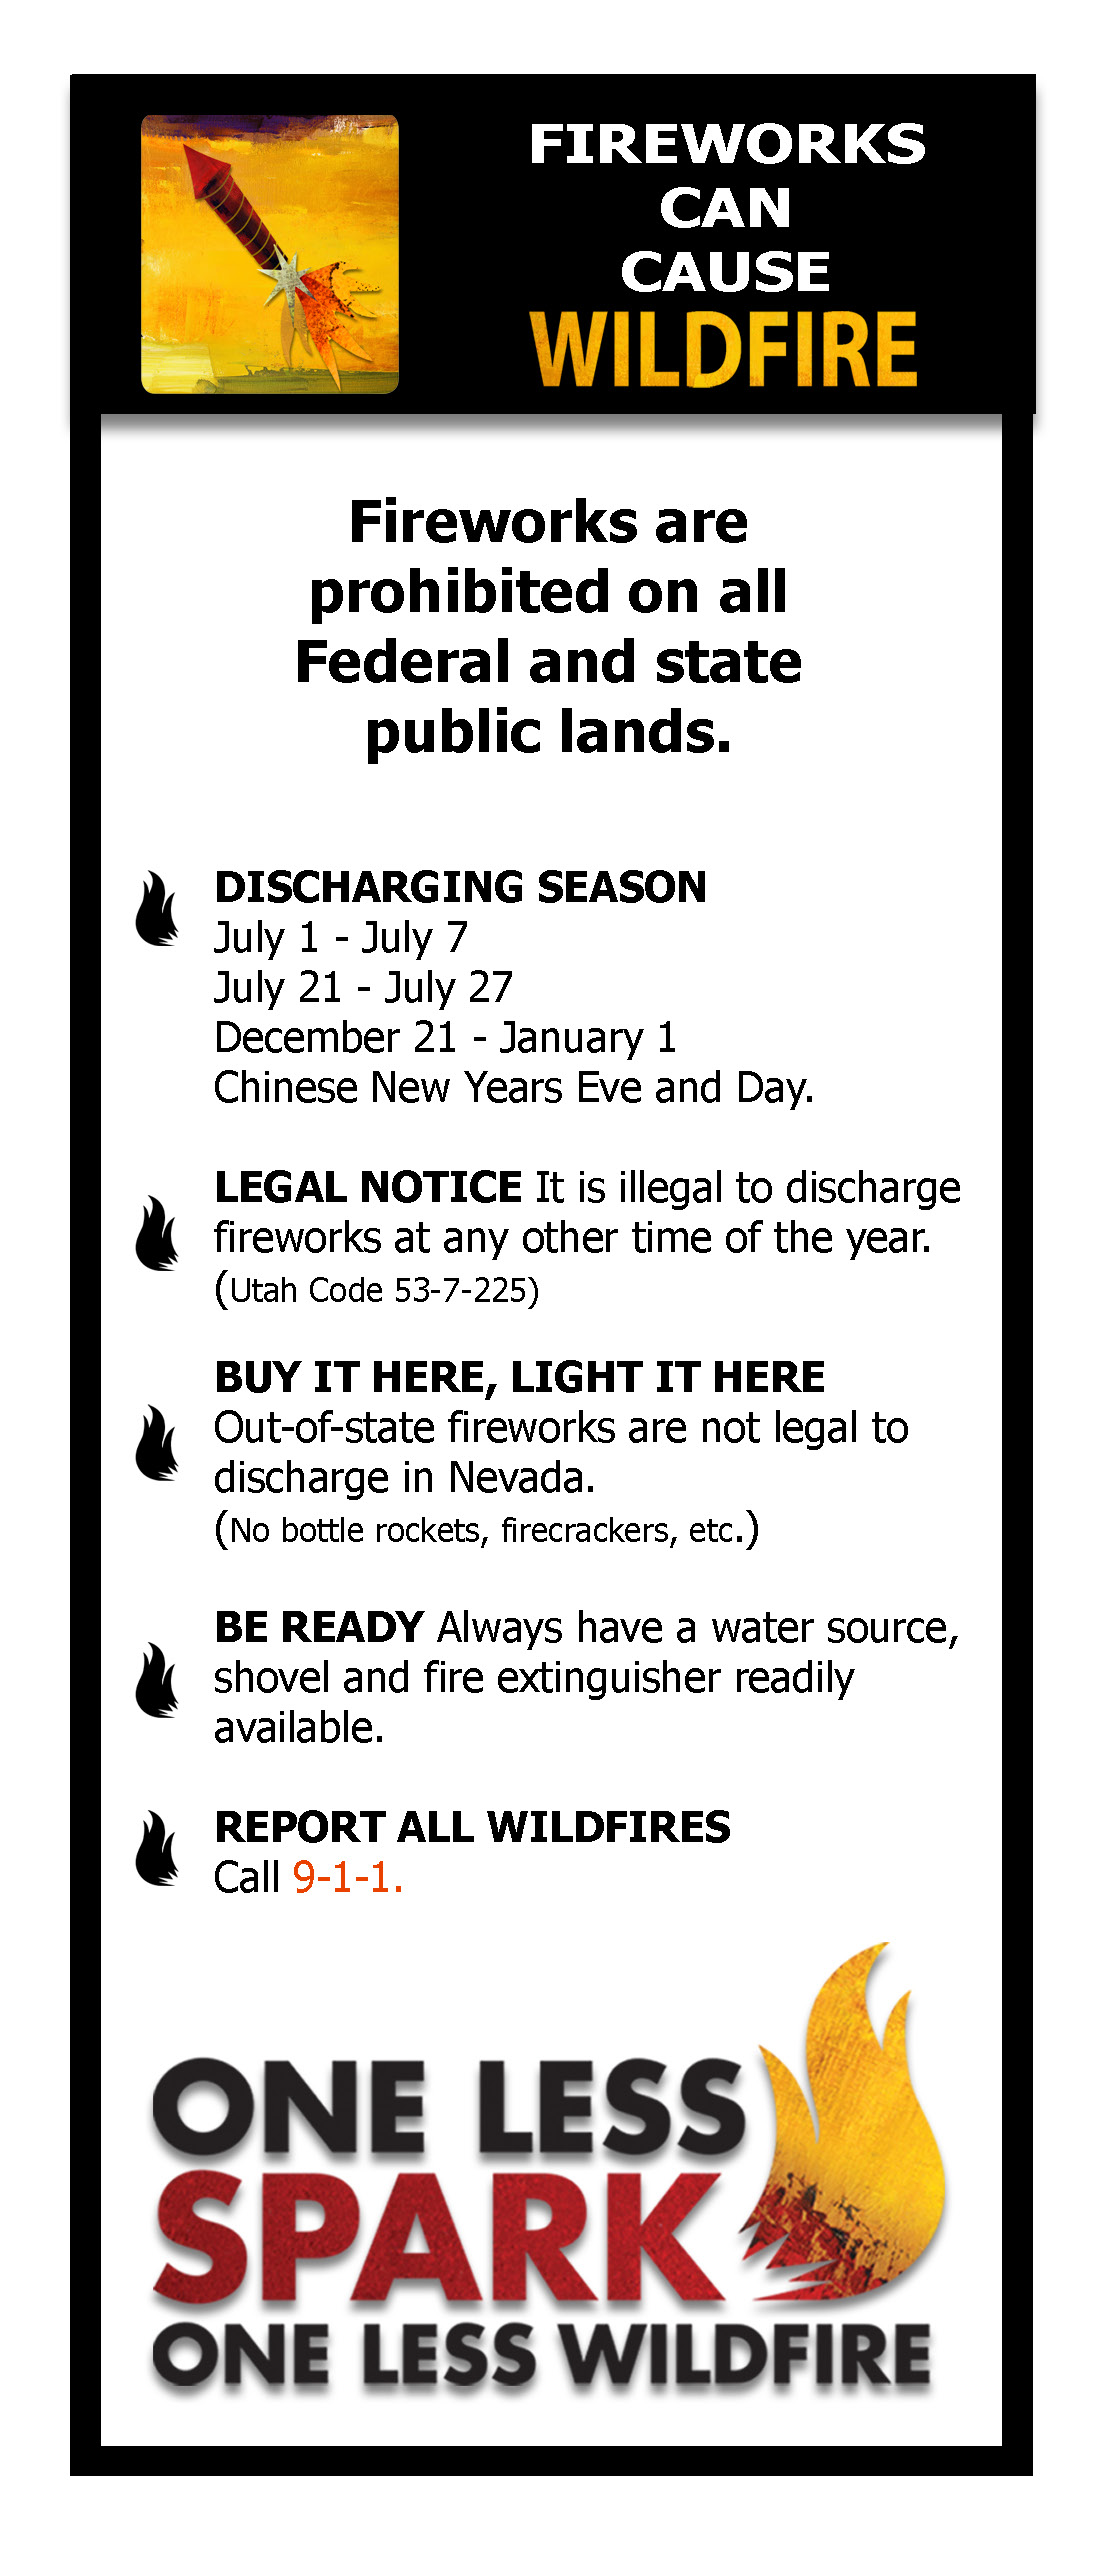 3.6 inch wide by 8.5 inch tall rack card; Fireworks can cause wildfire printed on top next to a picture of a rocket with flames. Fireworks prohibited on all Federal and State public lands; Black flame bullet points with: Discharge Season, Legal Notice, Buy it here, light it here, Be ready and report all wildfires. 